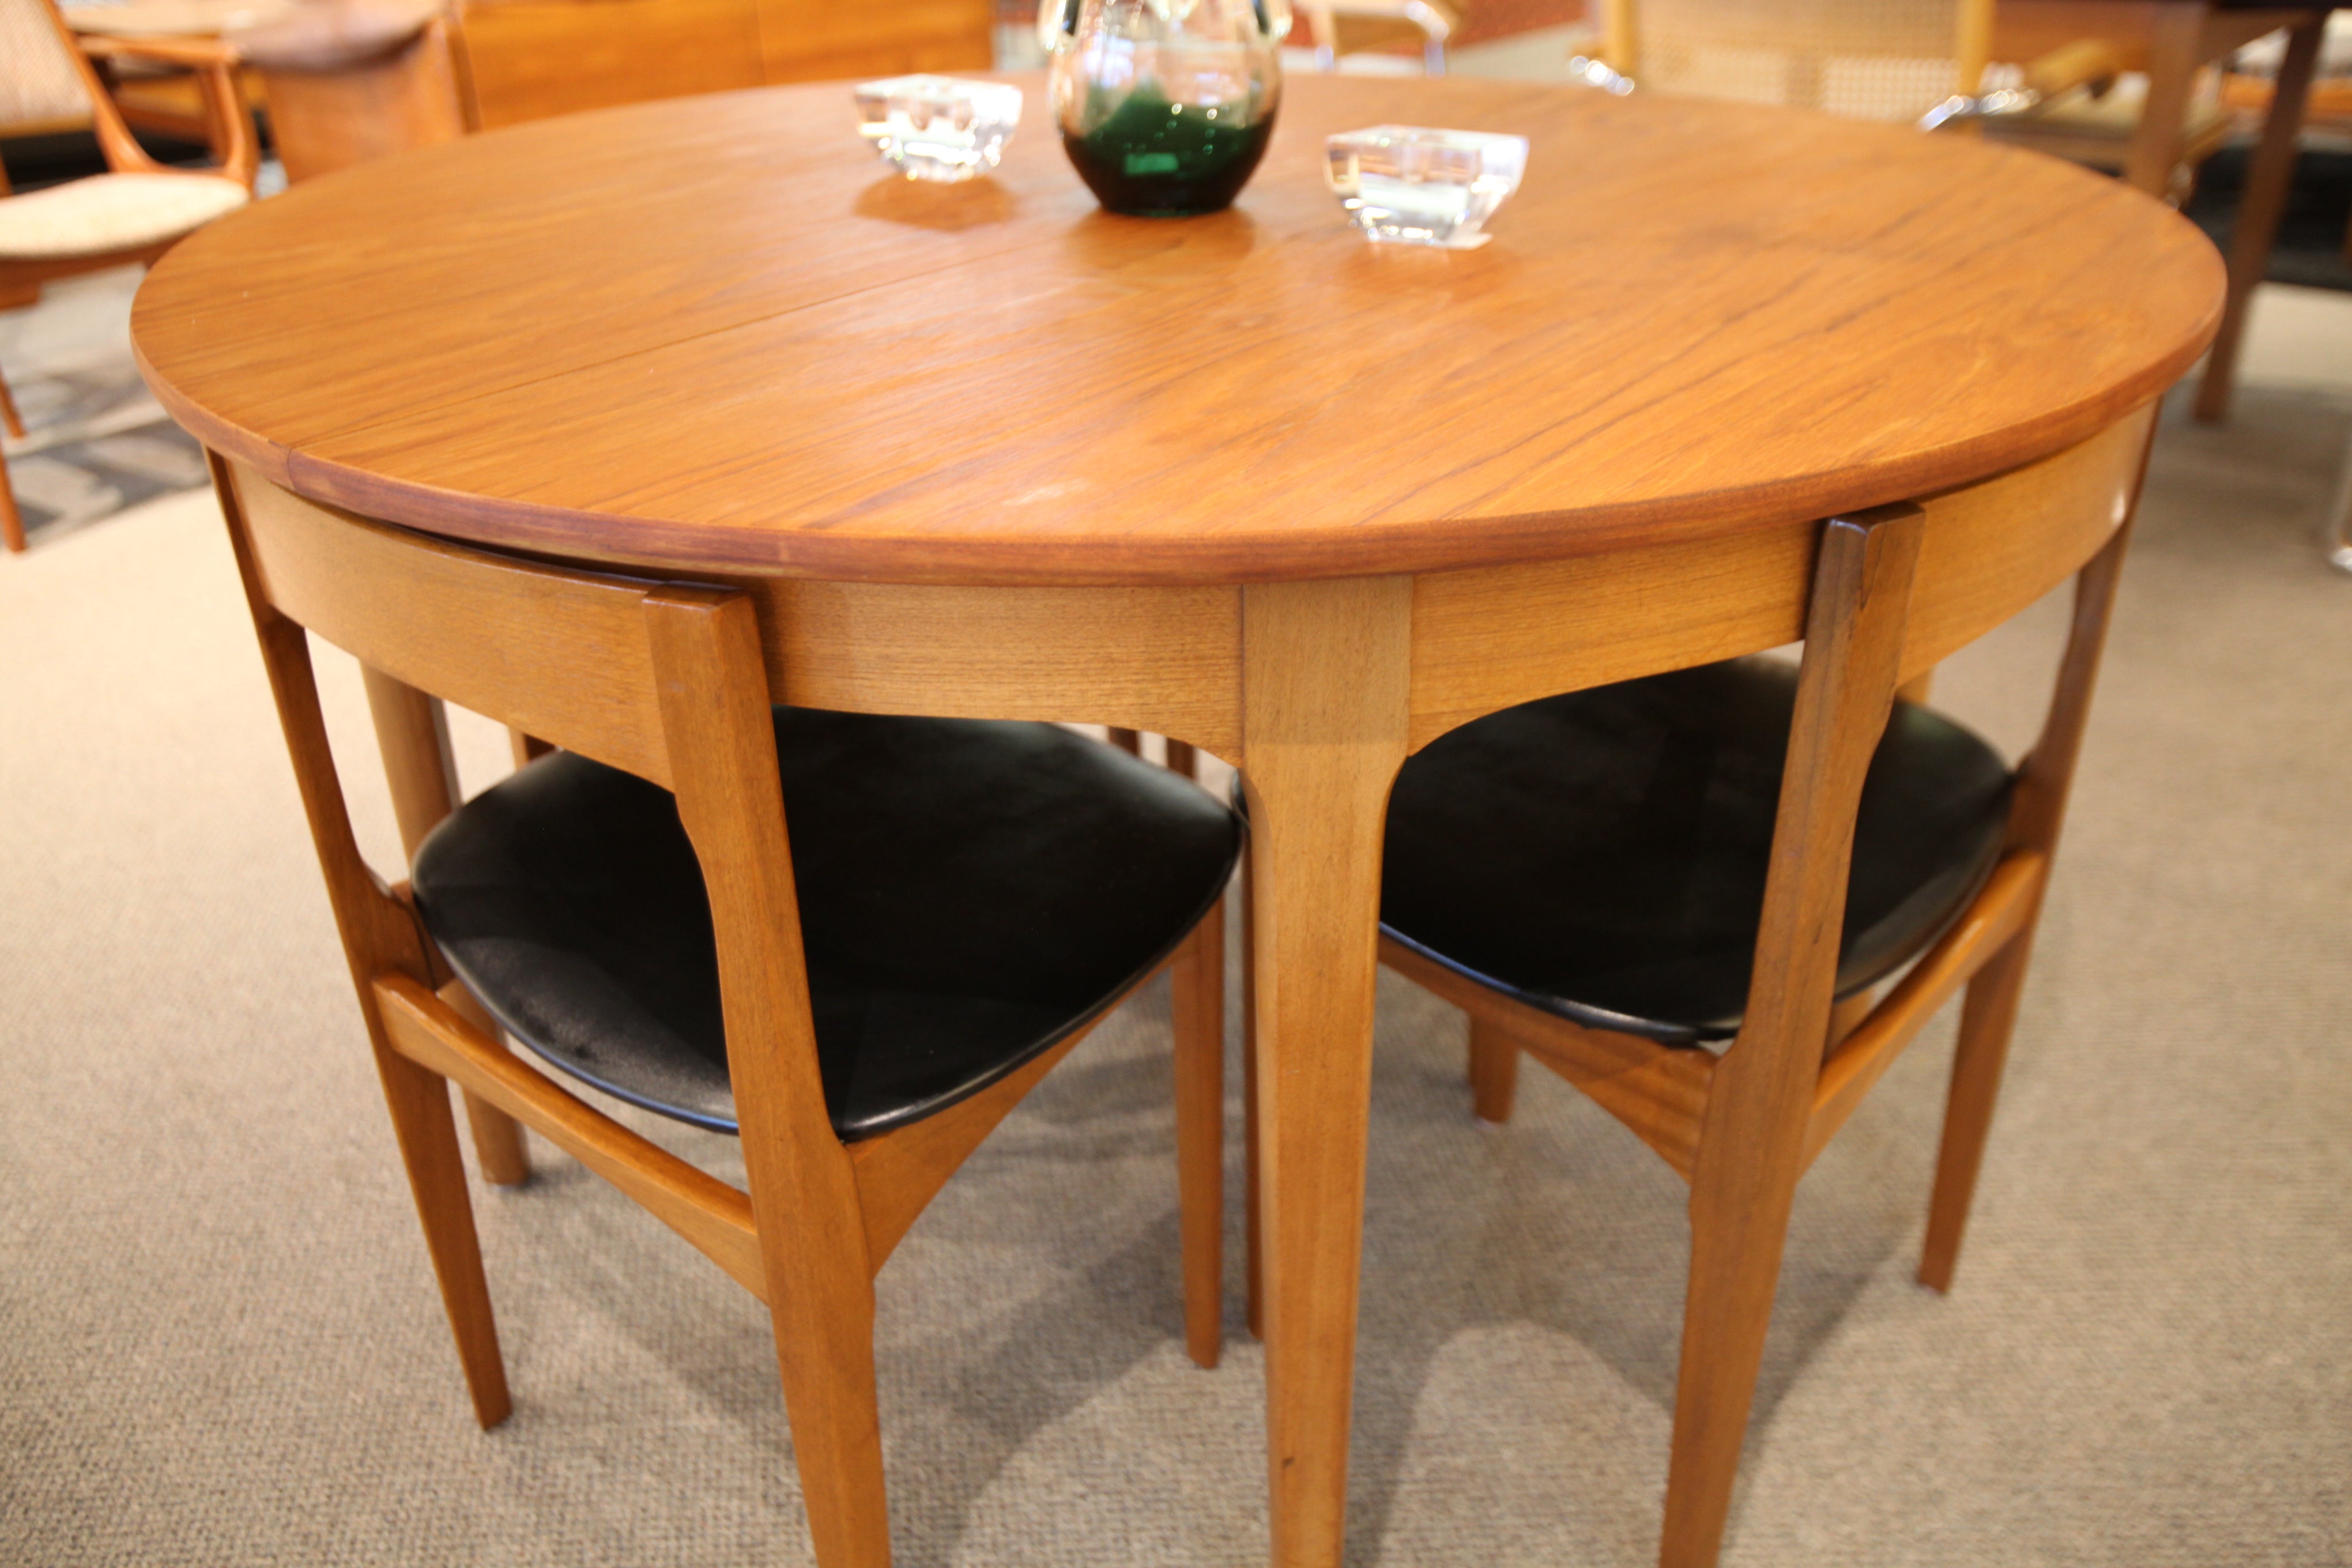 Nathan (England) Teak Dining Table and 4 Chairs (48"Round) or (66"L x 48"W)